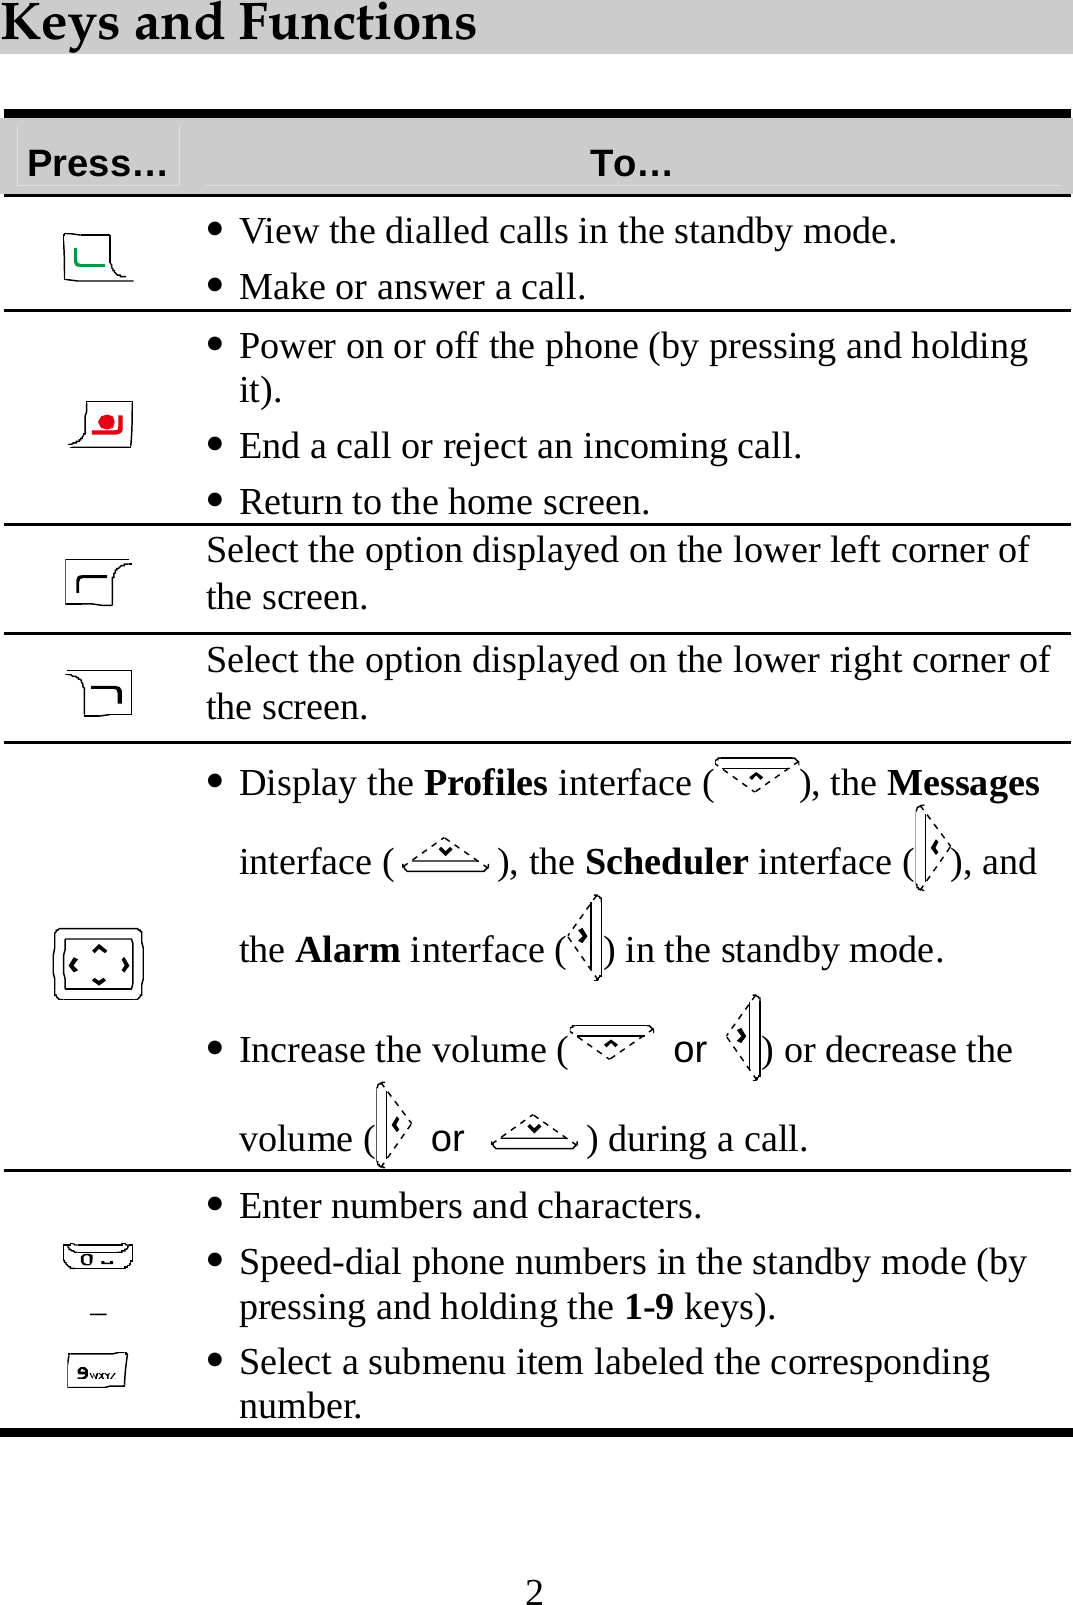 2 Keys and Functions  Press…  To…  z View the dialled calls in the standby mode. z Make or answer a call.  z Power on or off the phone (by pressing and holding it). z End a call or reject an incoming call. z Return to the home screen.  Select the option displayed on the lower left corner of the screen.  Select the option displayed on the lower right corner of the screen.  z Display the Profiles interface ( ), the Messages interface ( ), the Scheduler interface ( ), and the Alarm interface ( ) in the standby mode. z Increase the volume (  or  ) or decrease the volume (  or  ) during a call.  –  z Enter numbers and characters. z Speed-dial phone numbers in the standby mode (by pressing and holding the 1-9 keys). z Select a submenu item labeled the corresponding number. 